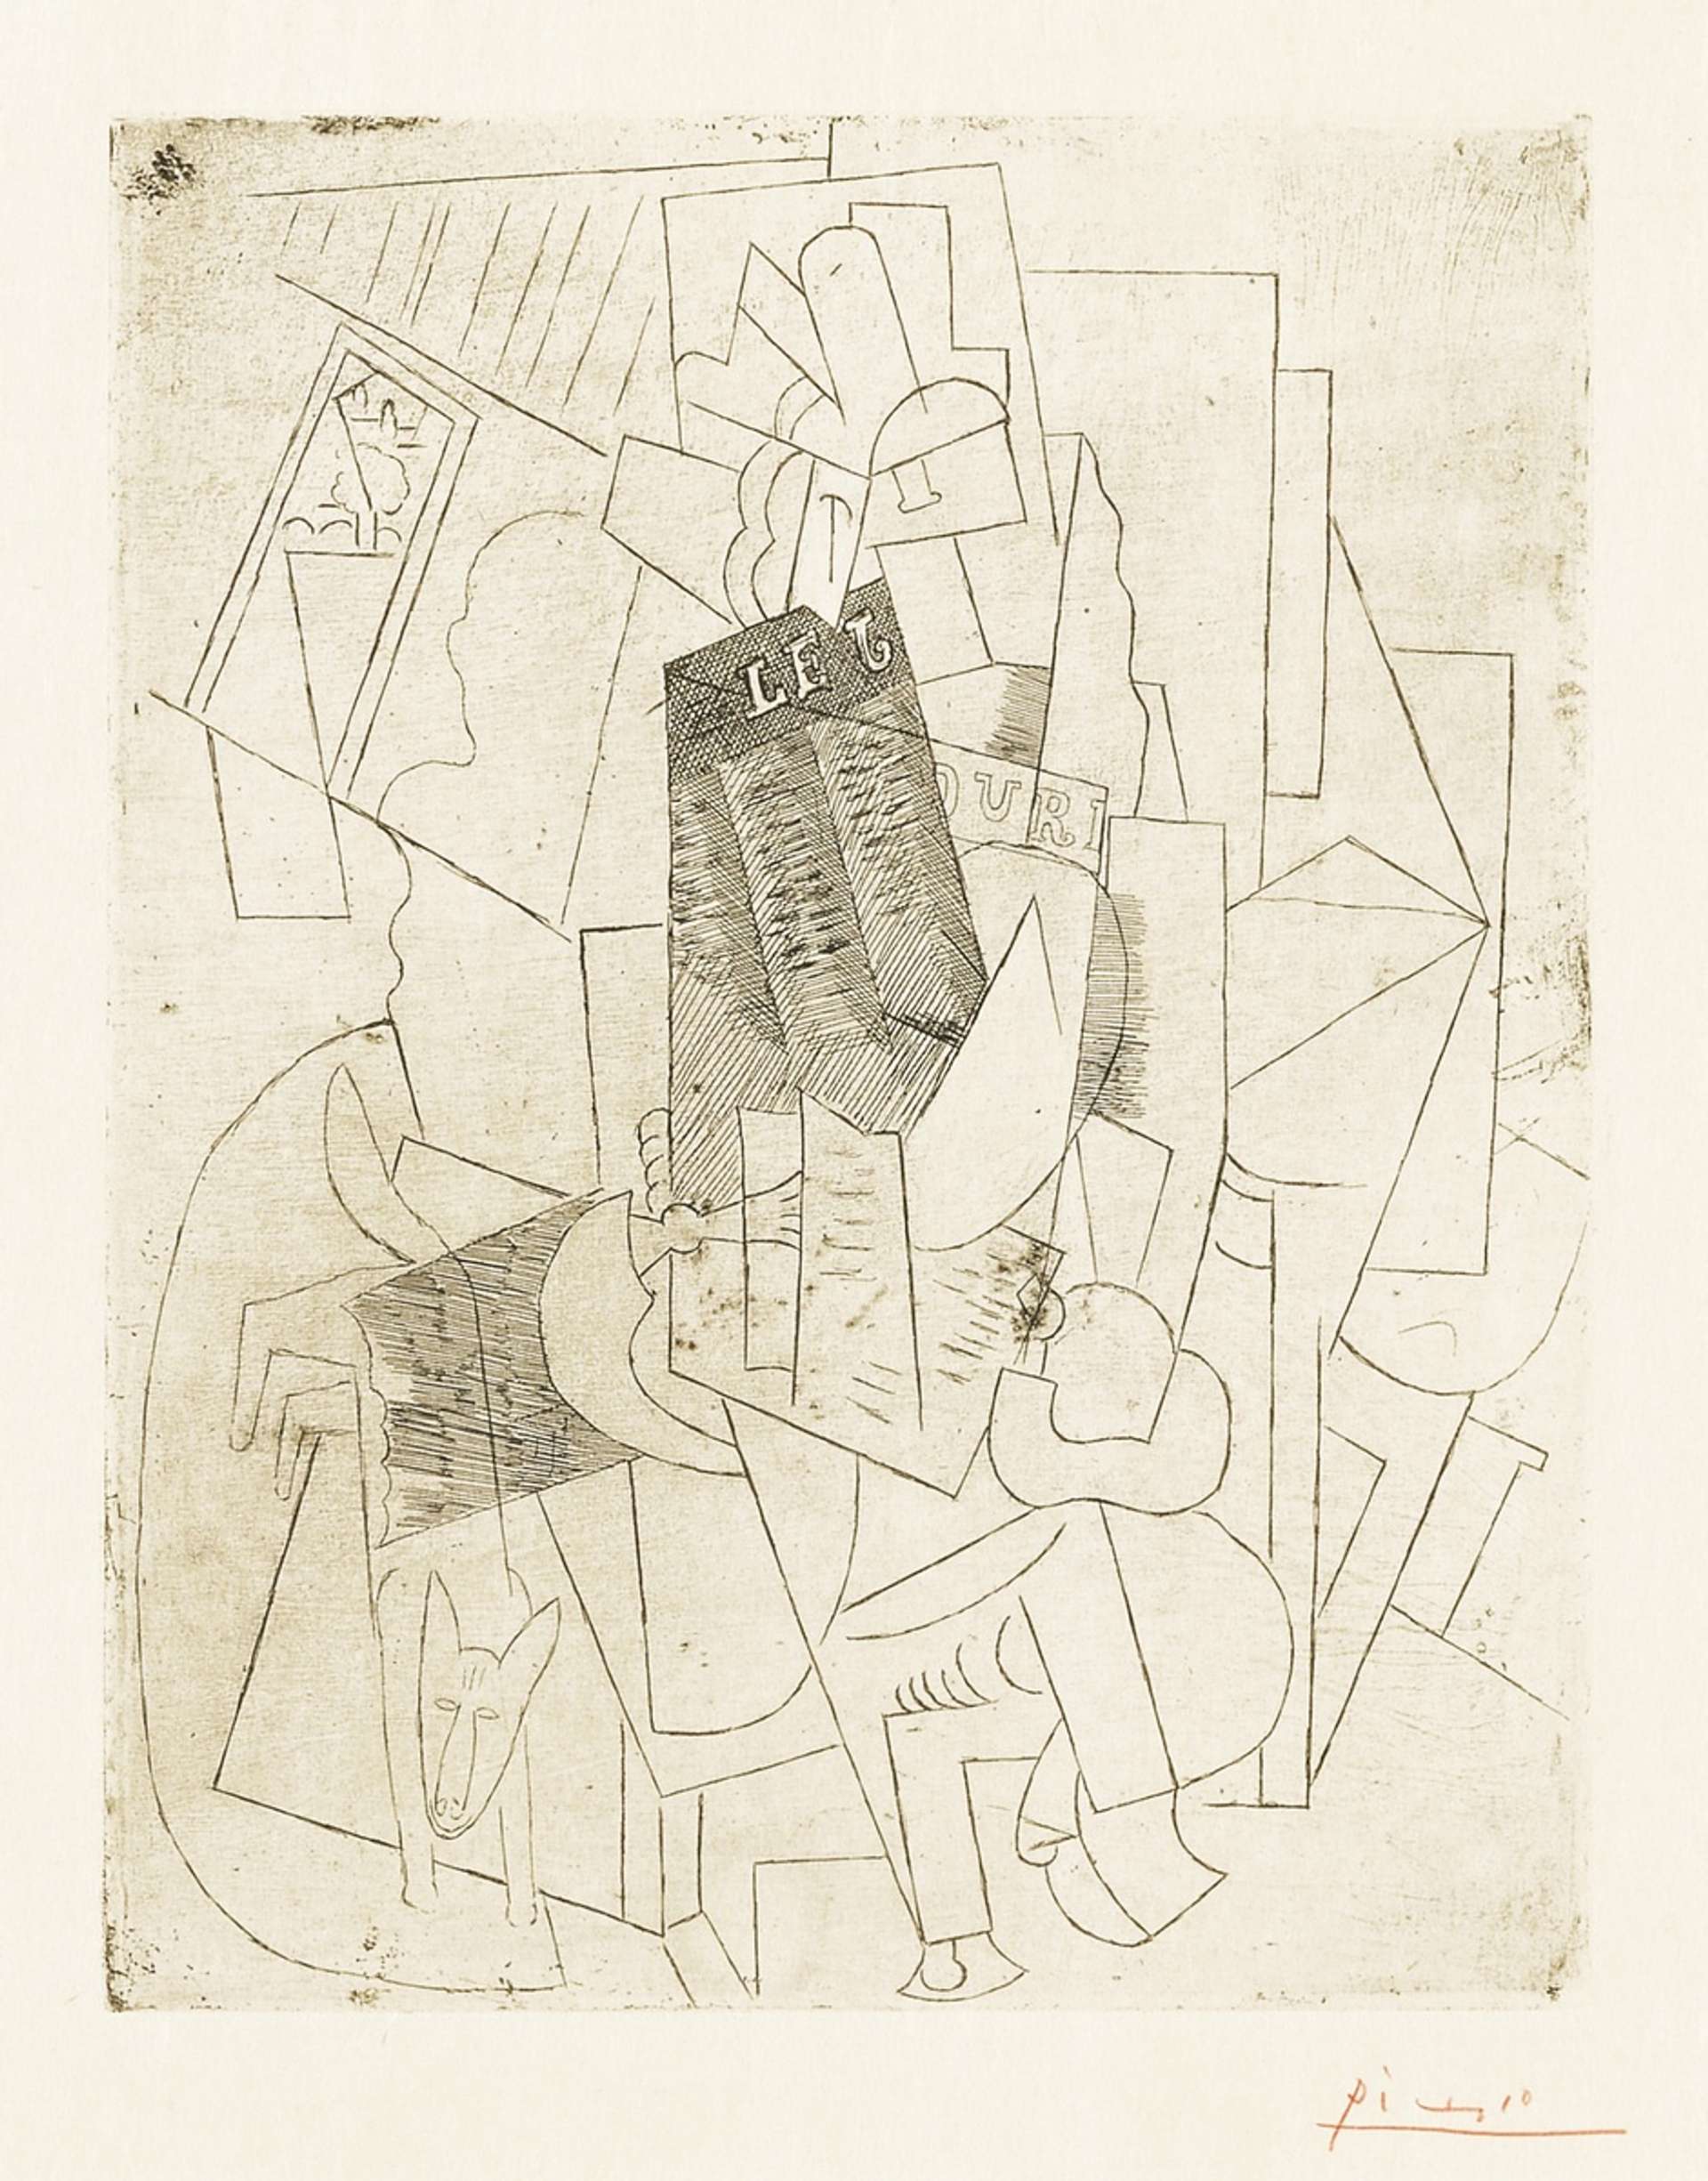 An image of the artwork L'Homme Au Chien by Pablo Picasso. It shows an abstracted man reading the newspaper, with a dog sitting at his feet. The work is mostly done in fine line, and the colour palette is monochromatic.